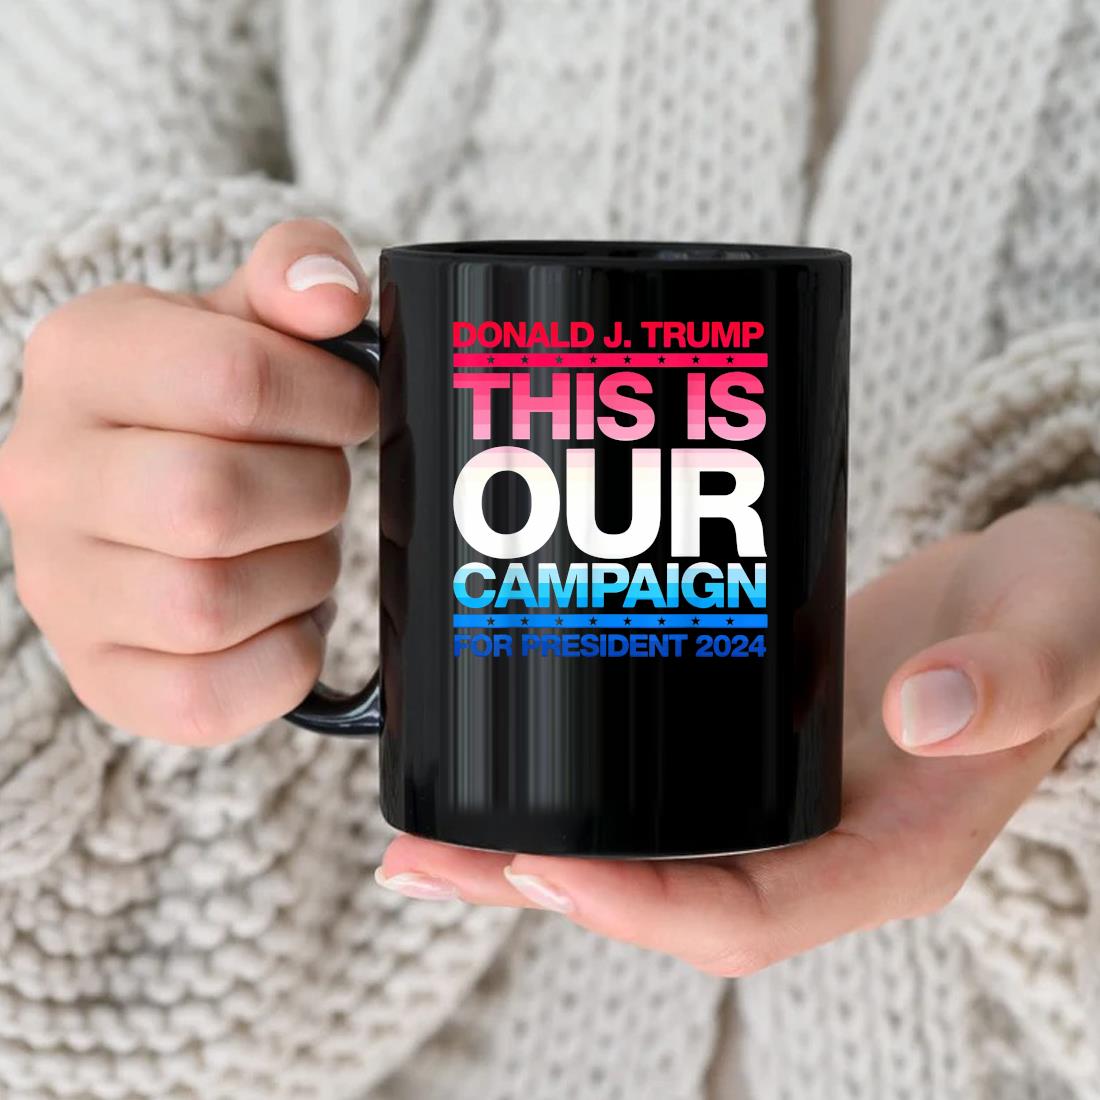 Donald J. Trump This Is Our Campaign For President 2024 Mug